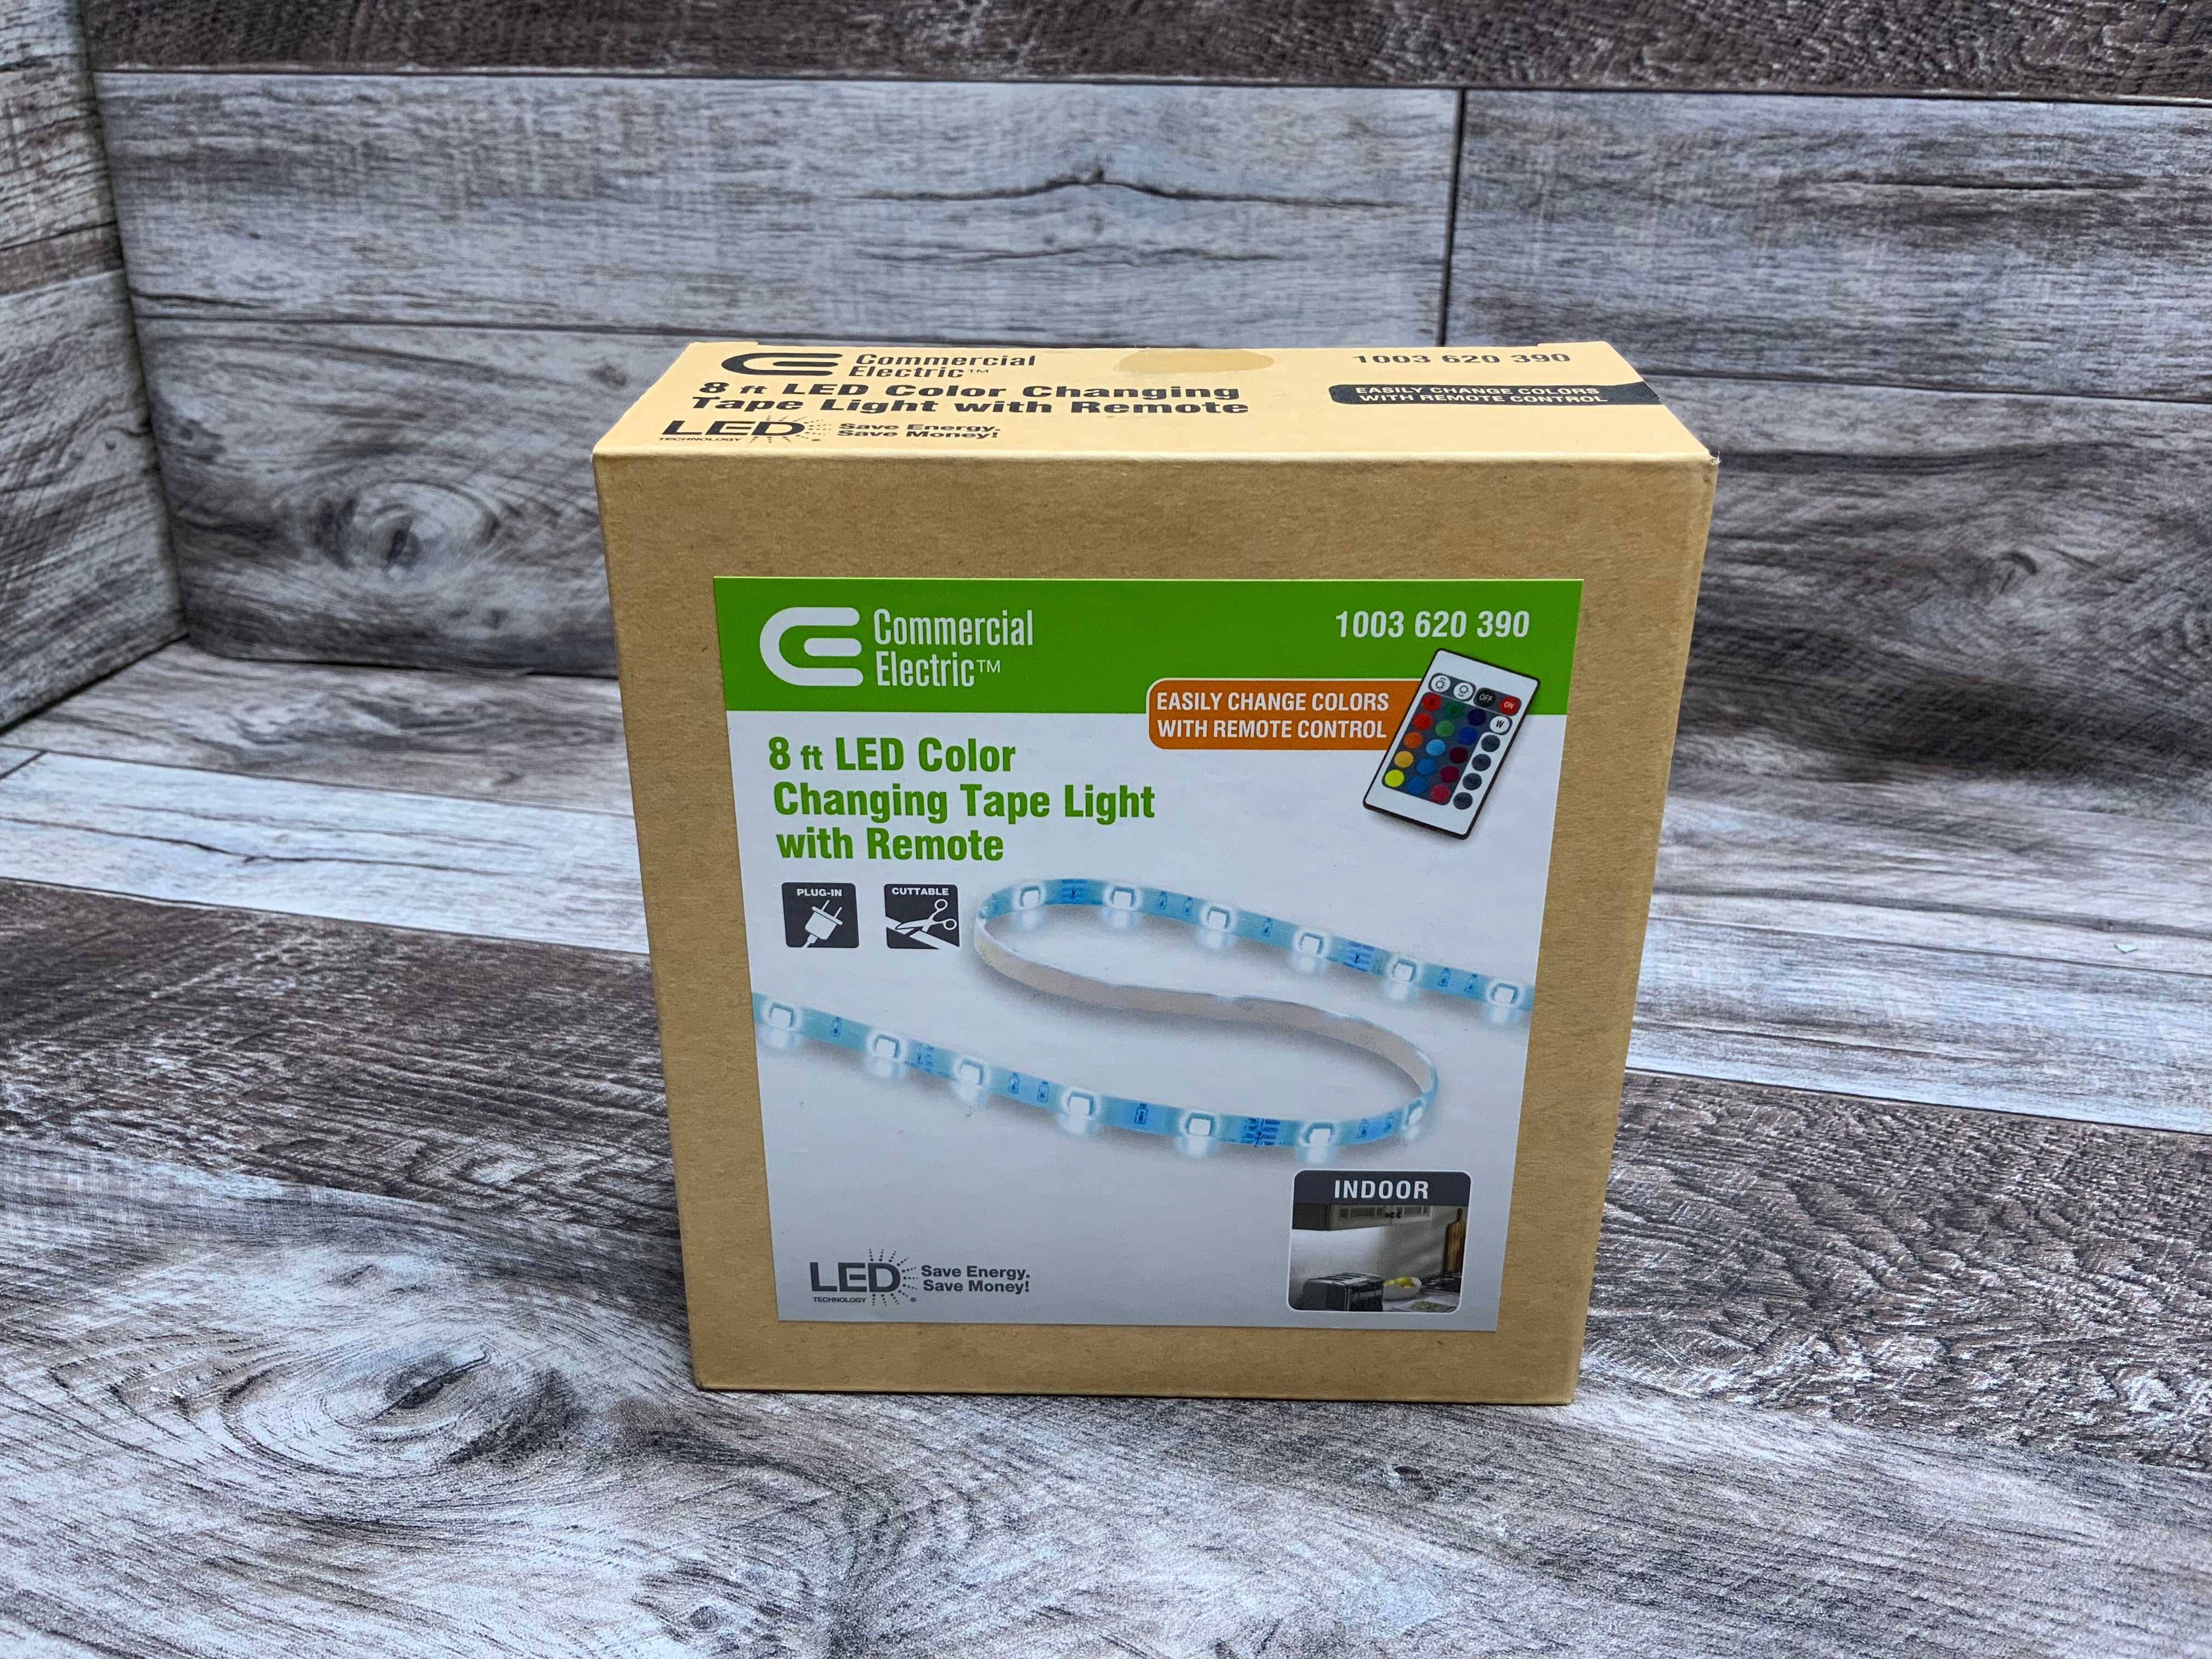 Commercial Electric 8 Ft. Indoor LED Color Changing Tape Light W/ Remote (8185550602478)